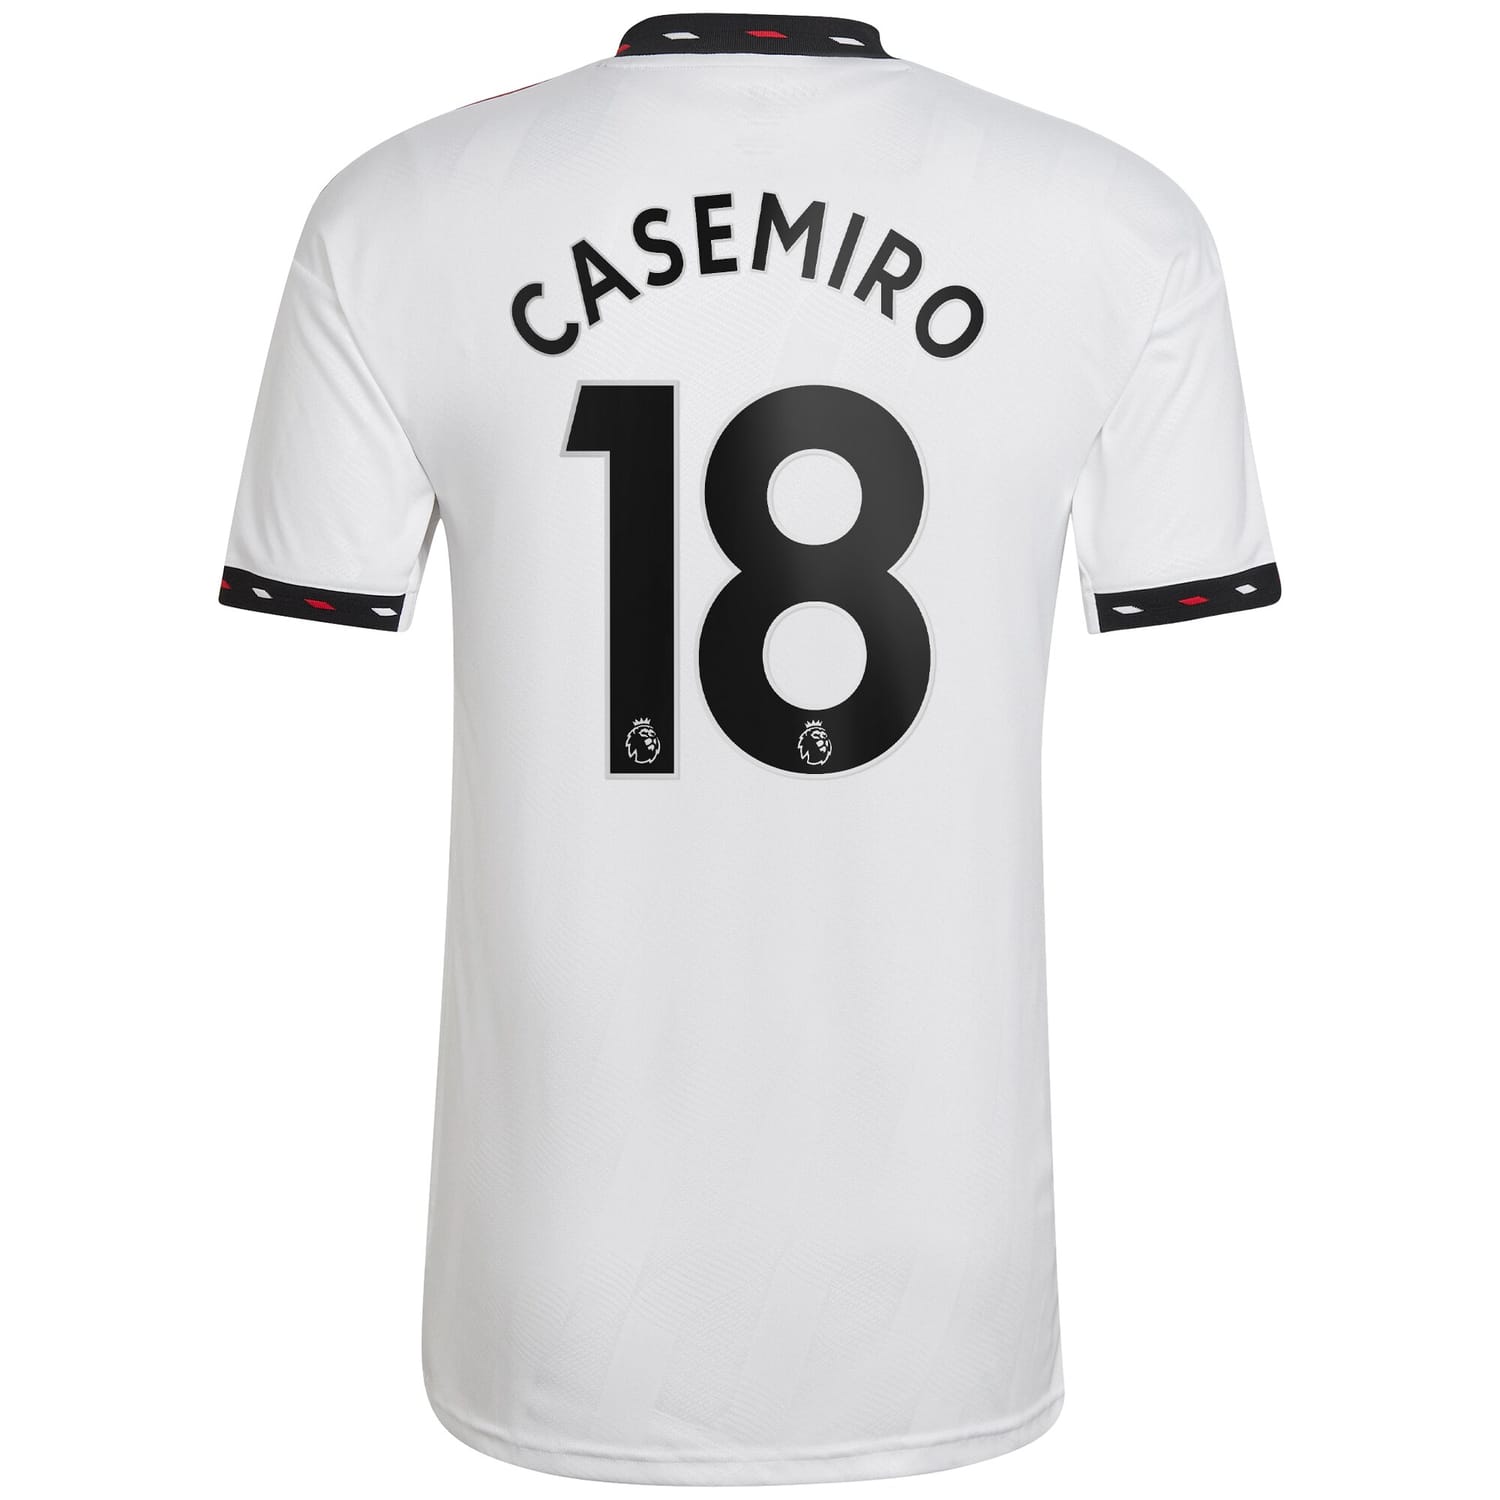 Premier League Manchester United Away Jersey Shirt White 2022-23 player Casemiro printing for Men